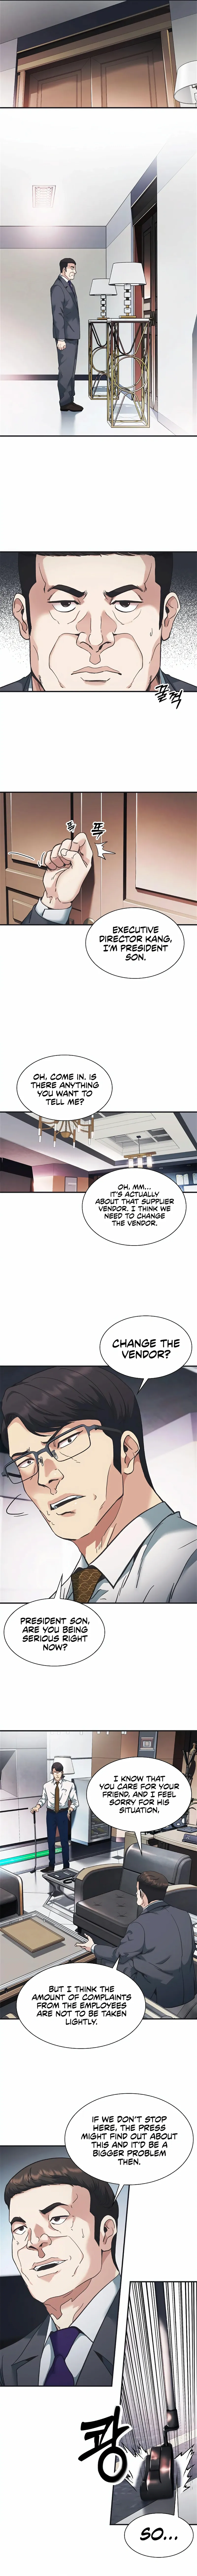 Chairman Kang: The Newcomer Chapter 28 page 7